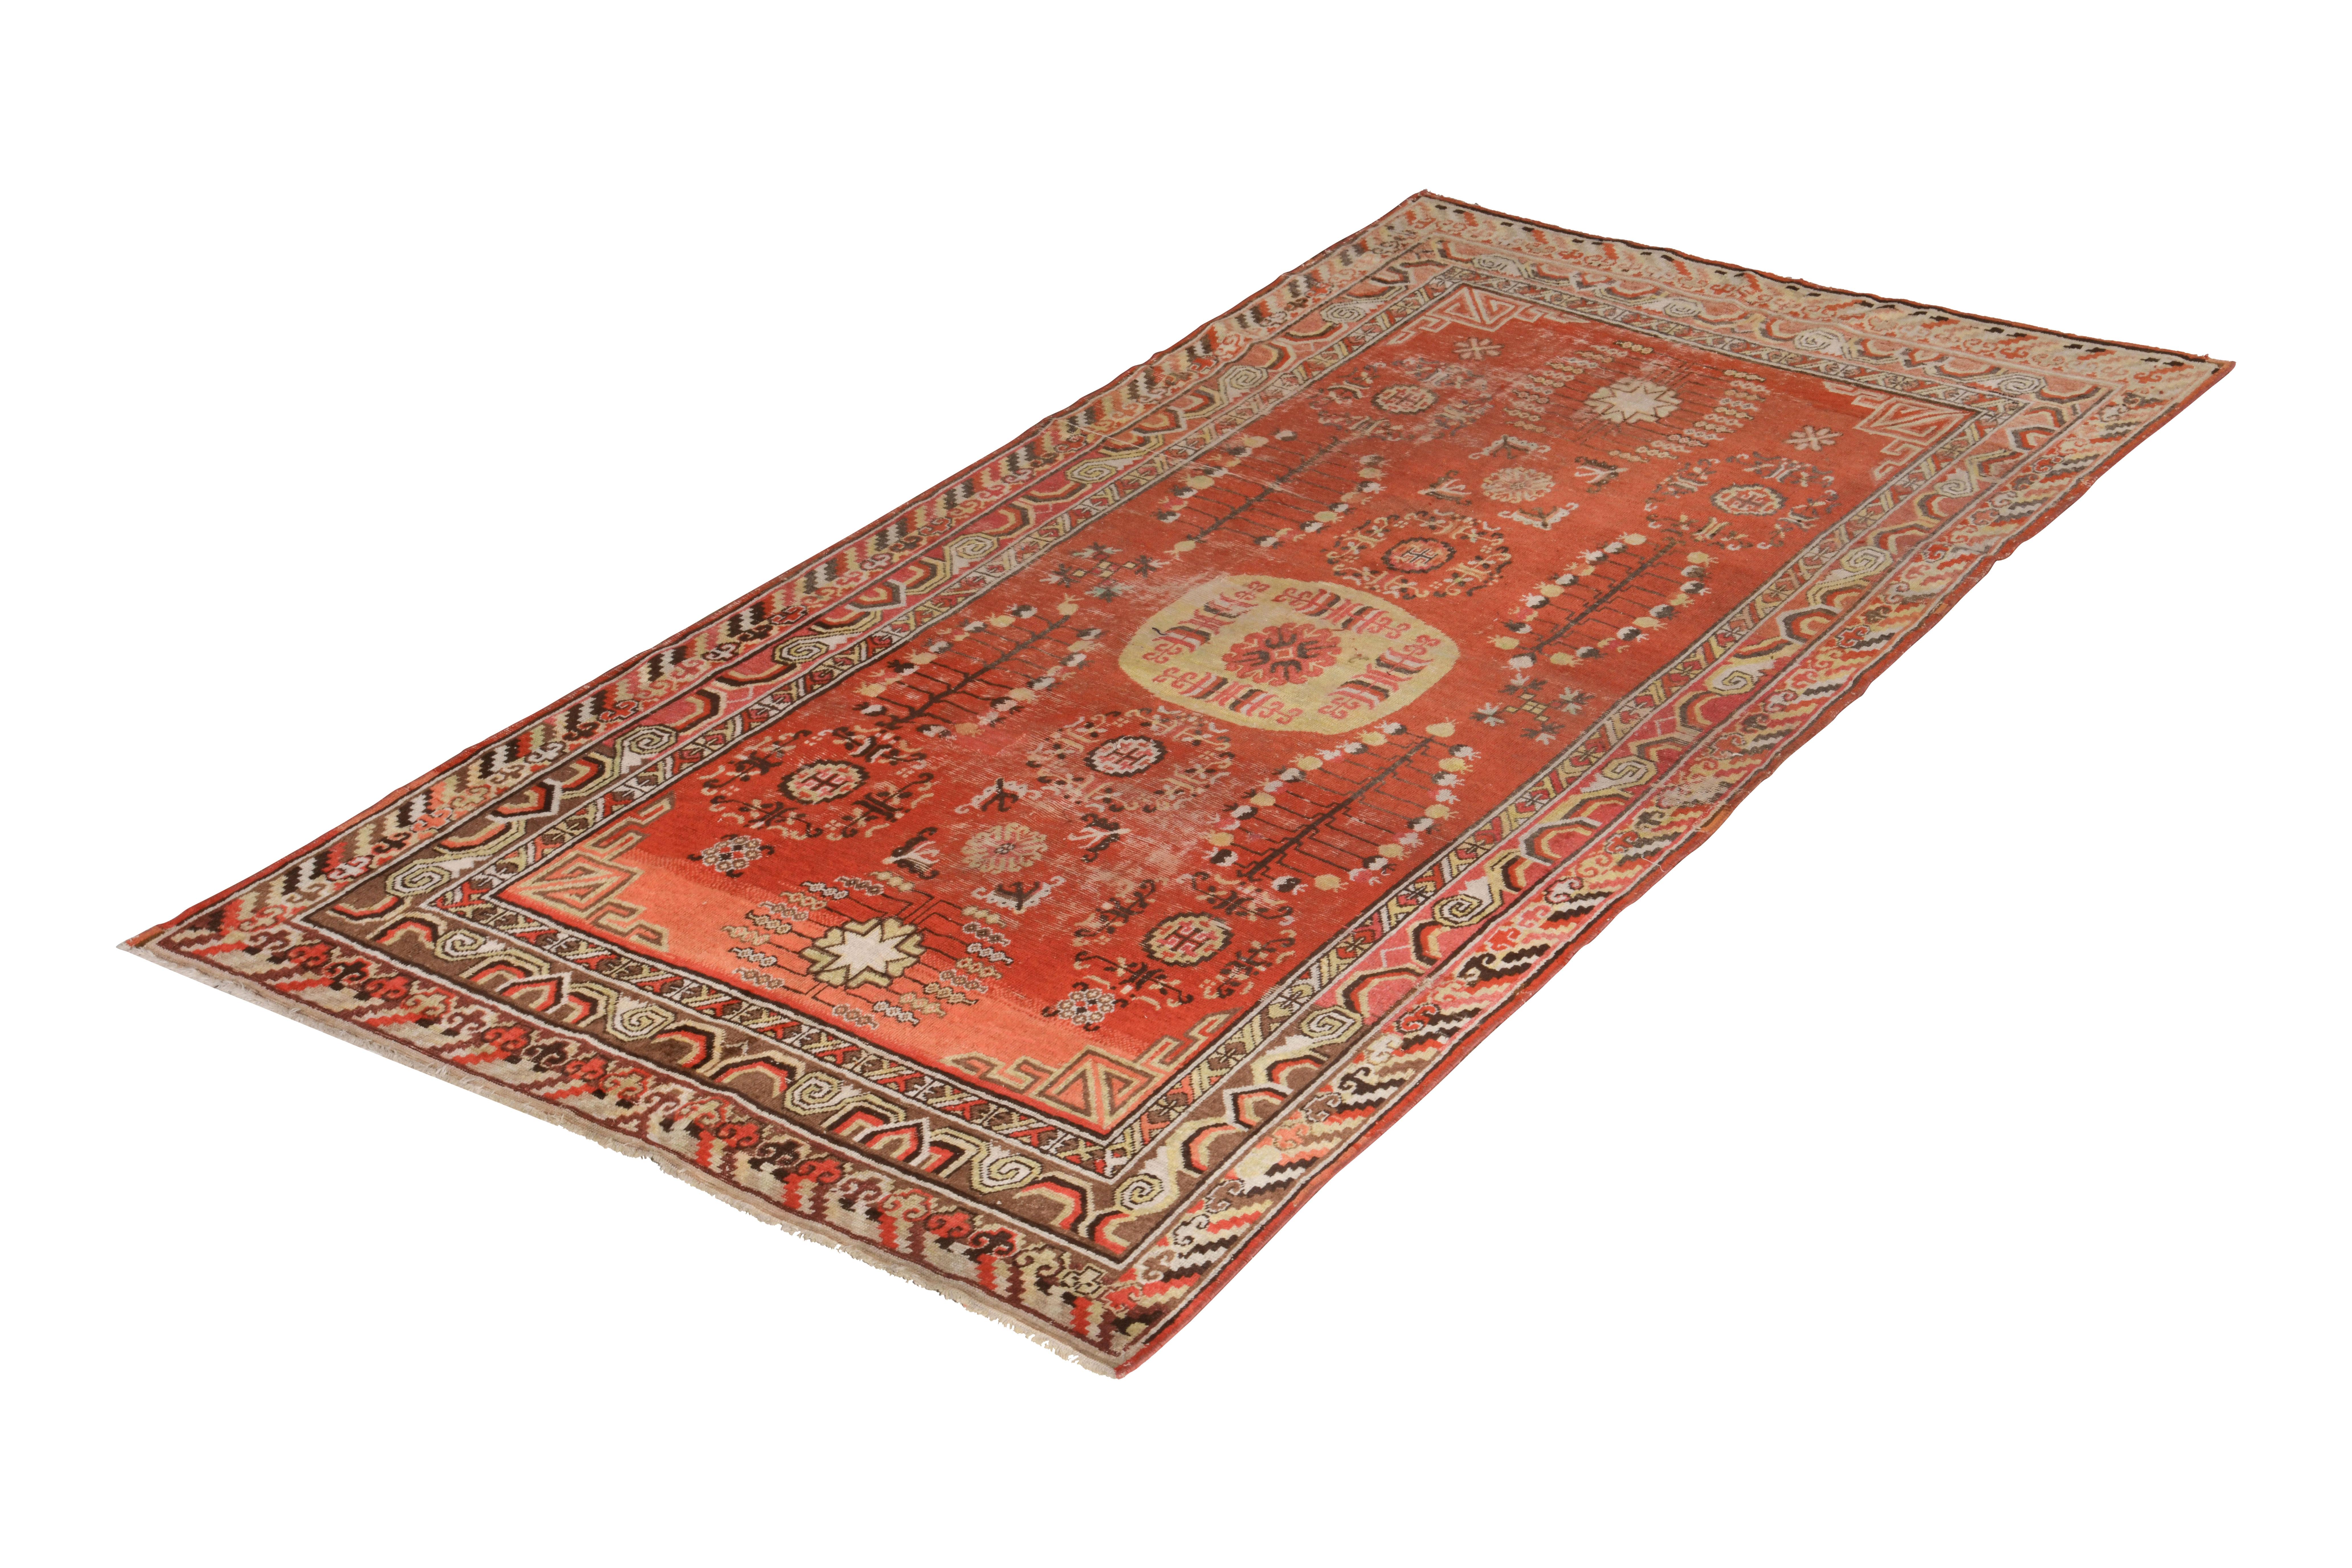 Hand knotted in wool originating from East Turkestan circa 1950-1960, this midcentury piece connotes a vintage Khotan rug design with notable emphasis on regal Chinese medallion patterns in a transitional red and beige-brown colorway. Connoisseurs